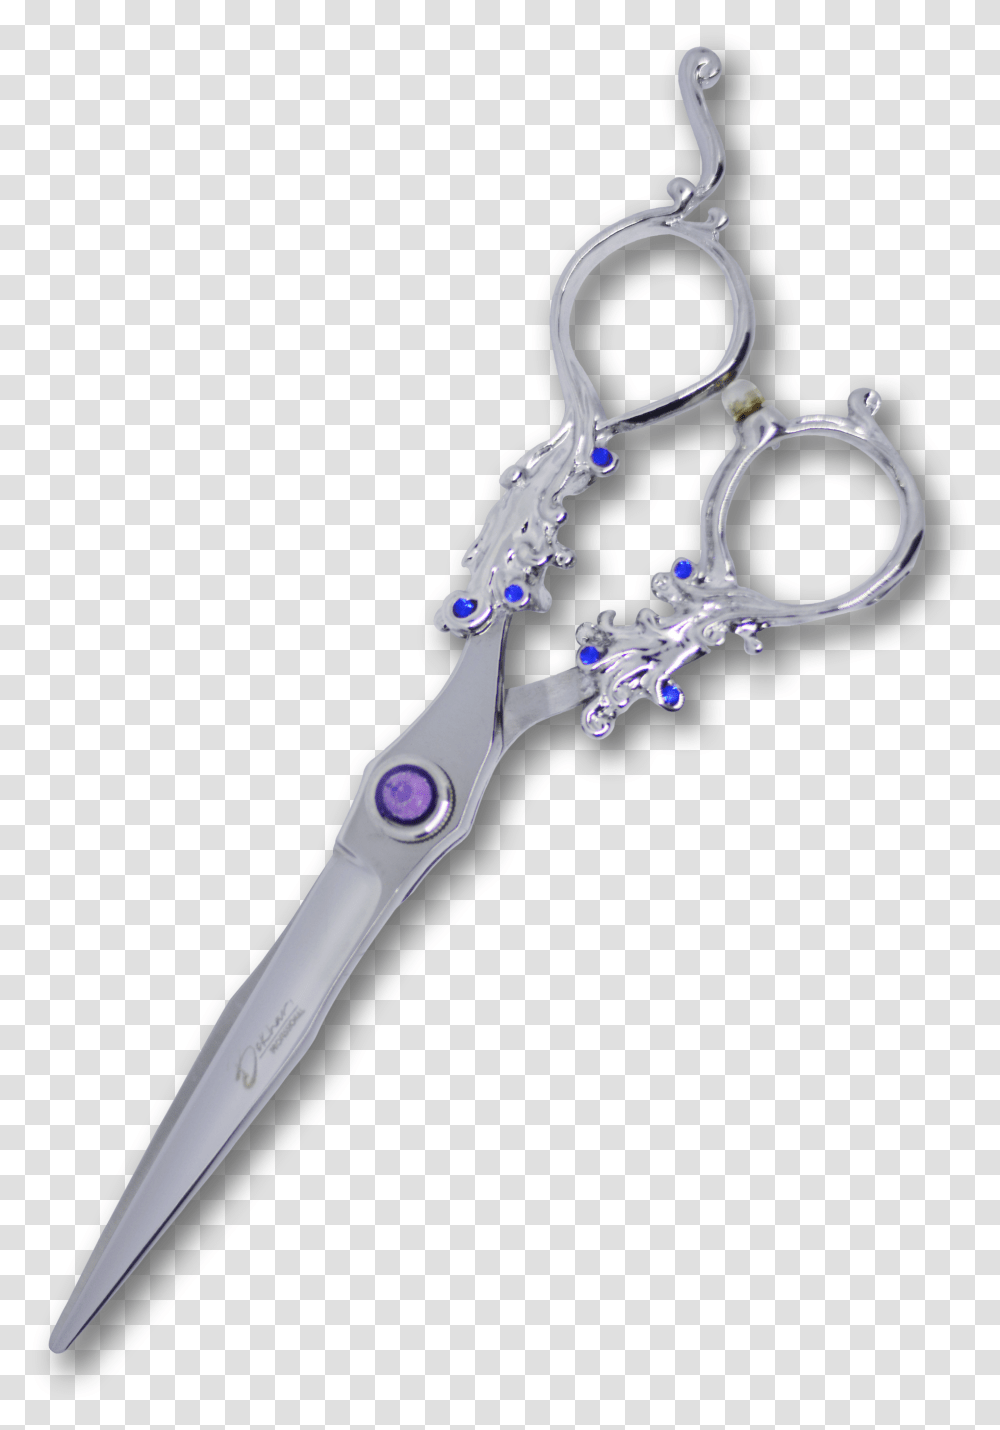 Bokhari Professional Hair Cutting Shears Scissors Hw23 Knife, Weapon, Weaponry, Blade Transparent Png